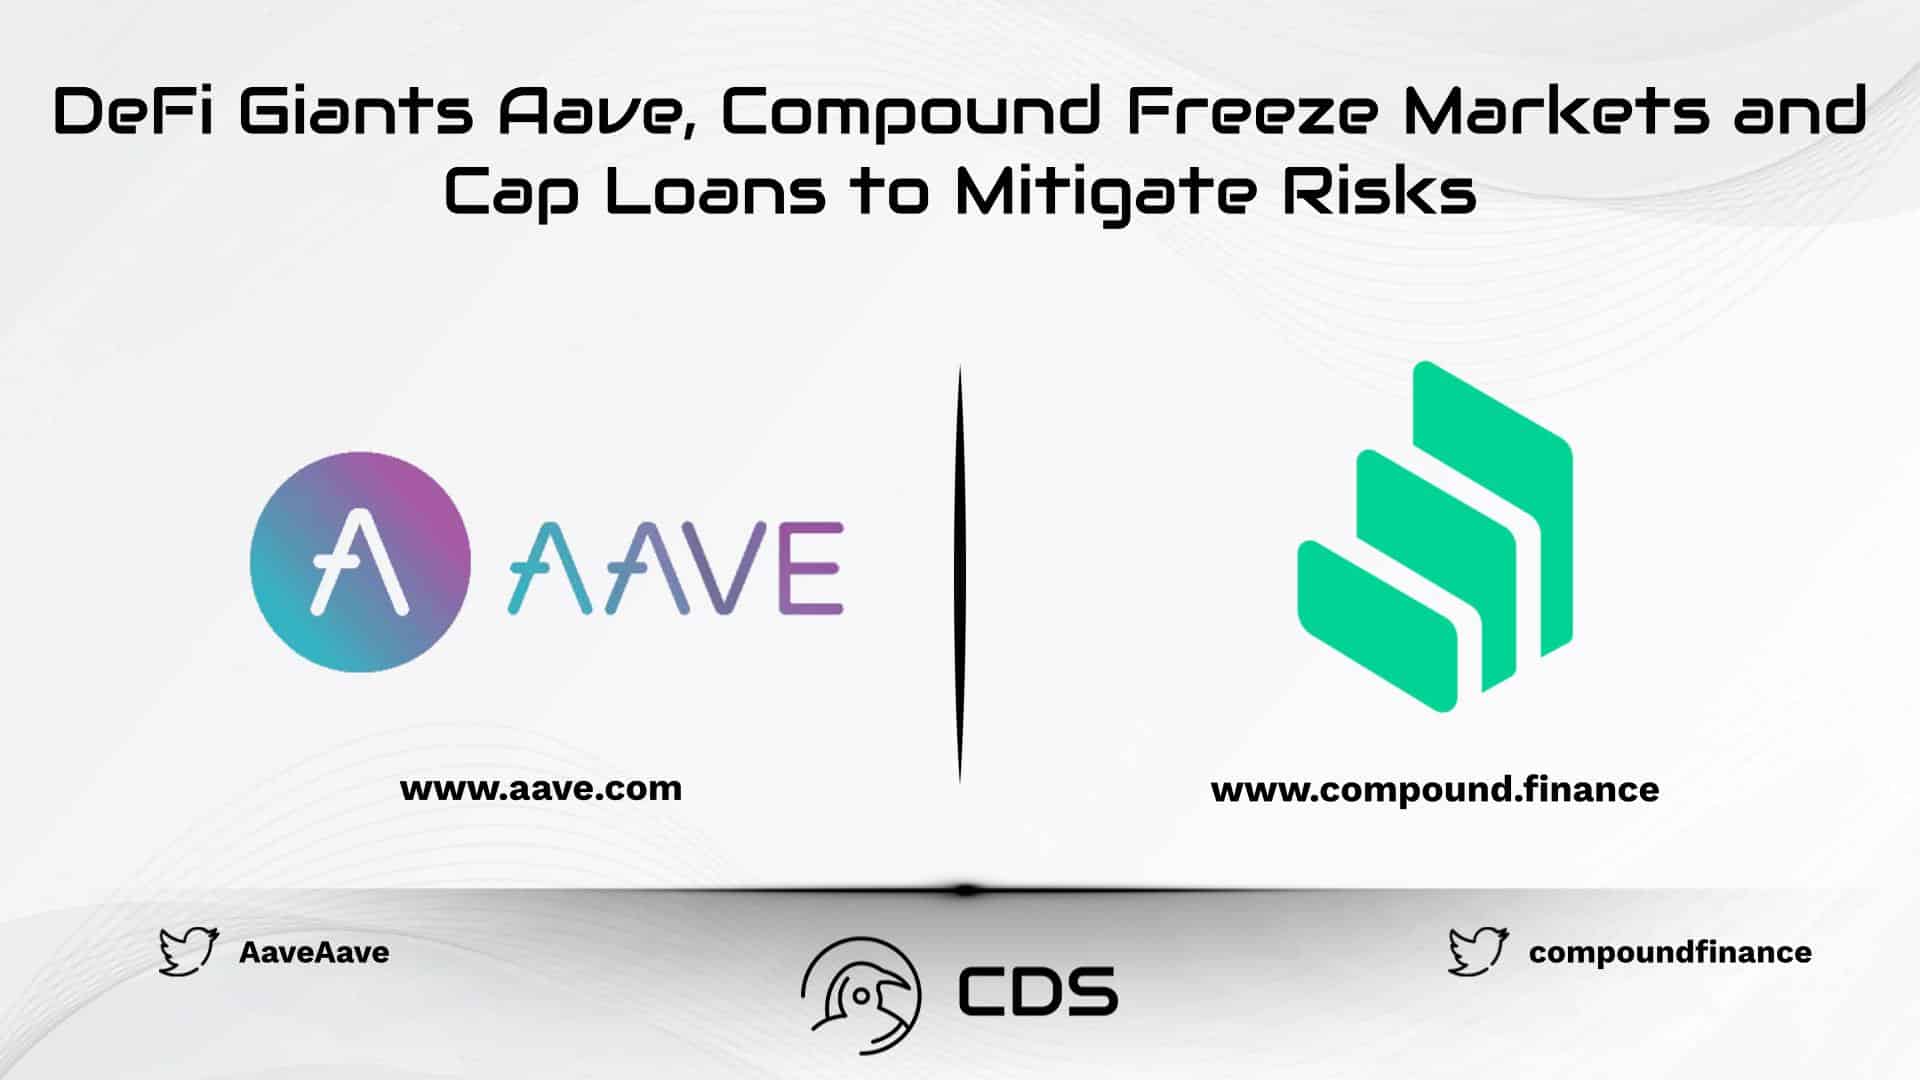 DeFi Giants Aave, Compound Freeze Markets and Cap Loans to Mitigate Risks